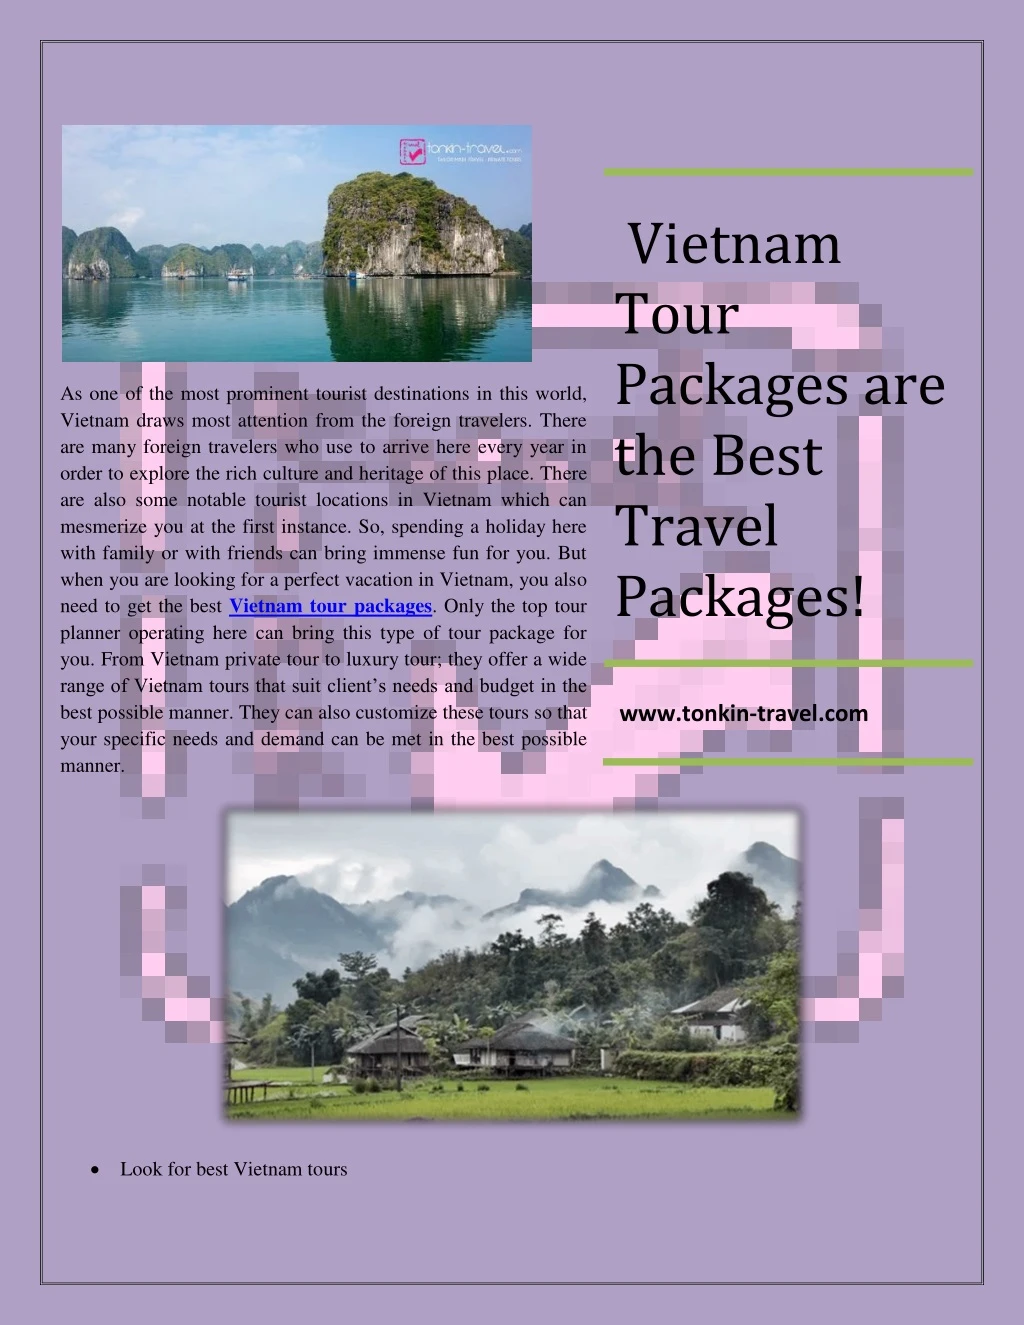 vietnam tour packages are the best travel packages